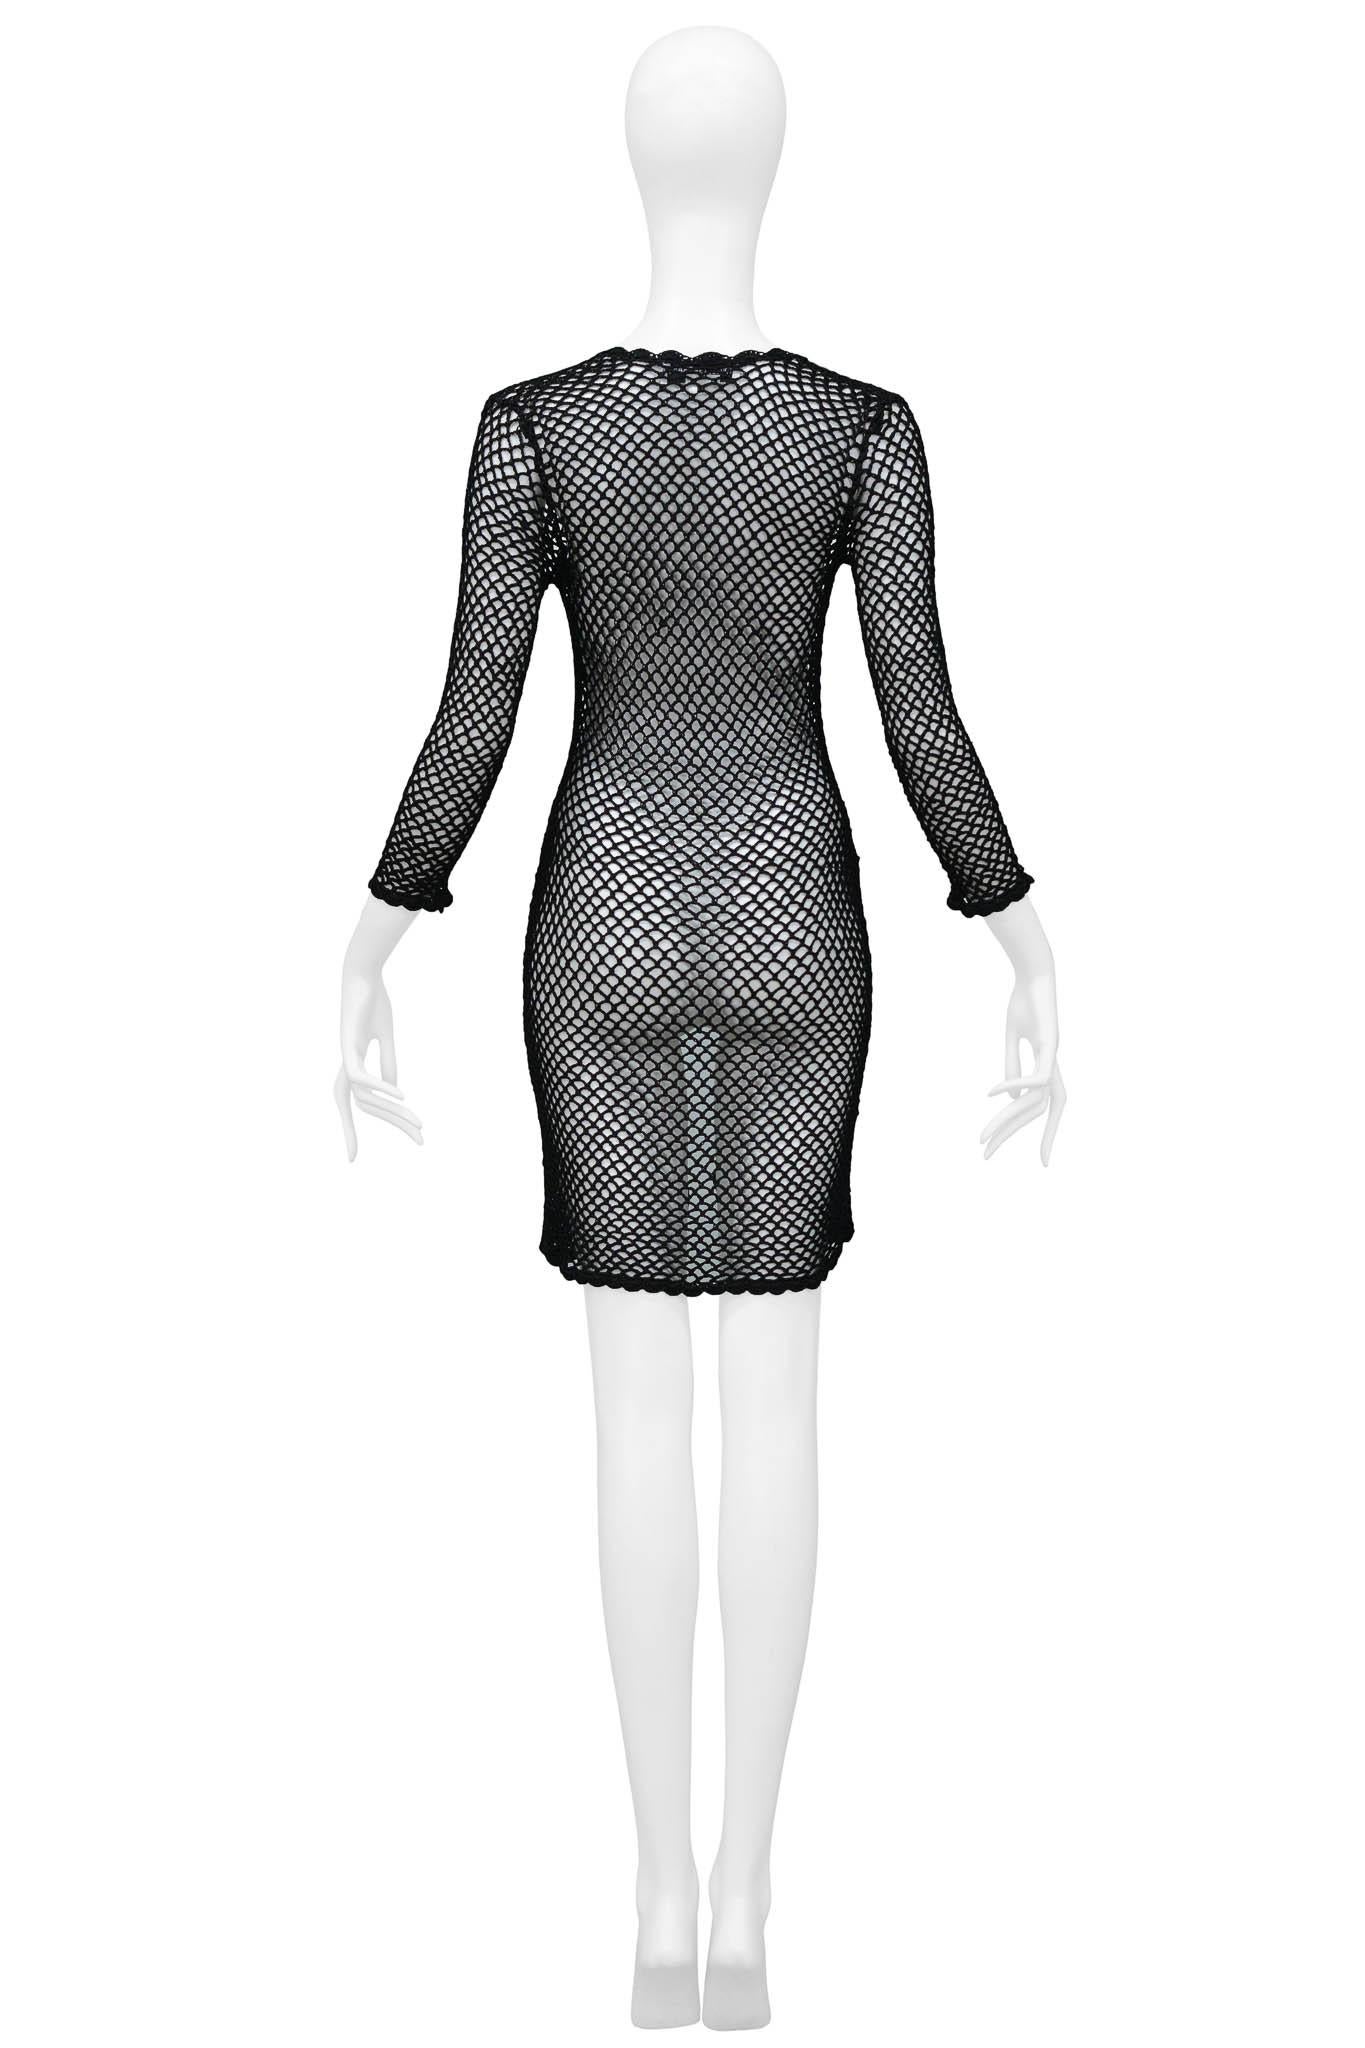 Dolce & Gabbana Black Crochet Fishnet Cardigan Dress 1990S In Excellent Condition For Sale In Los Angeles, CA